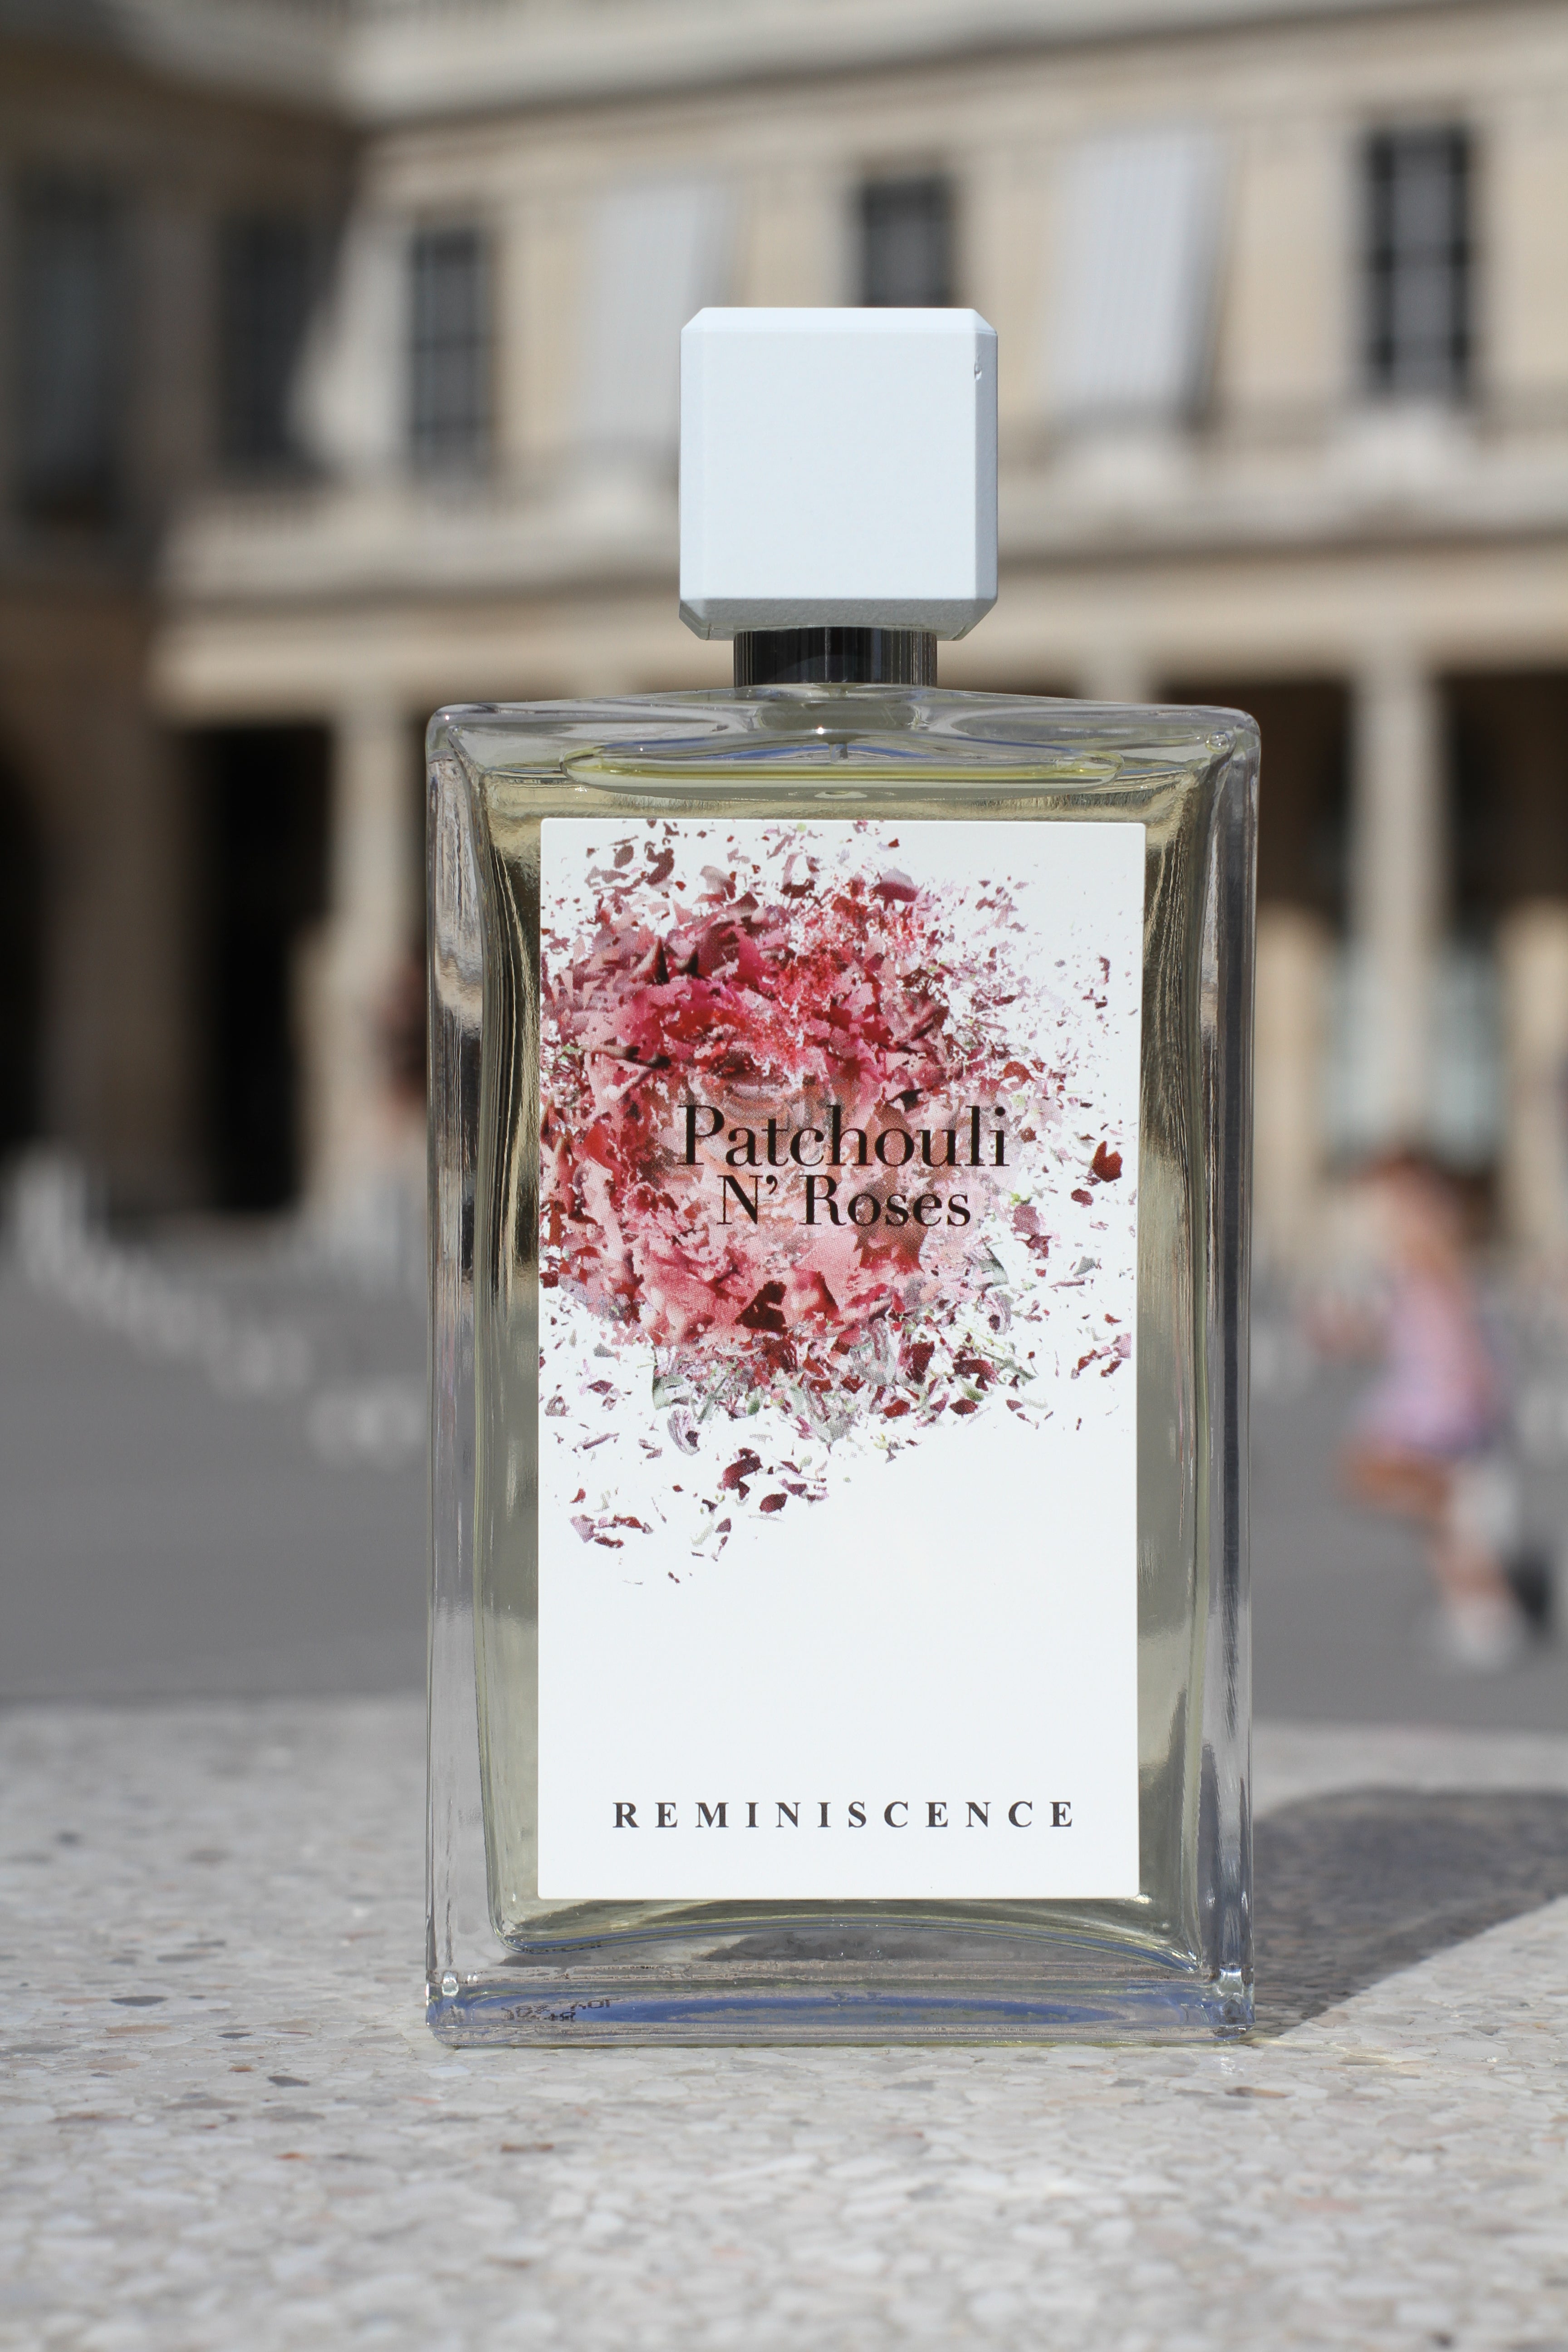 Reminiscence - Patchouli N'Roses